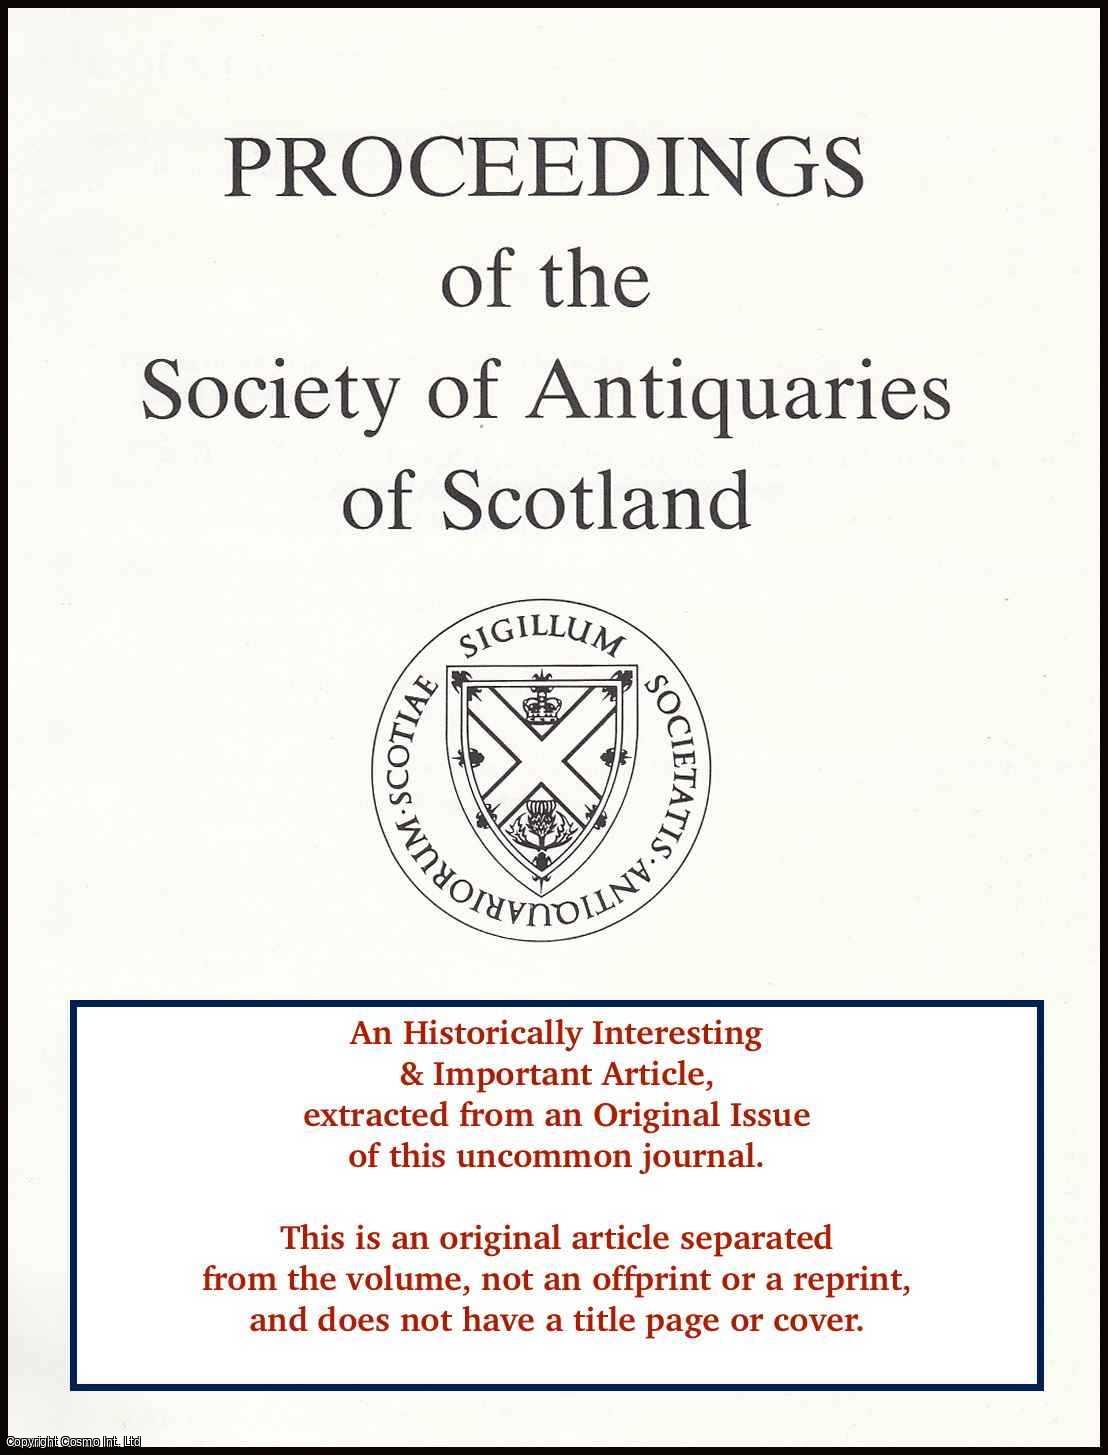 J.N. Graham Ritchie & Others - Knappers, Dunbartonshire: A Reassessment. An original article from the Society of Antiquaries of Scotland, 1981.